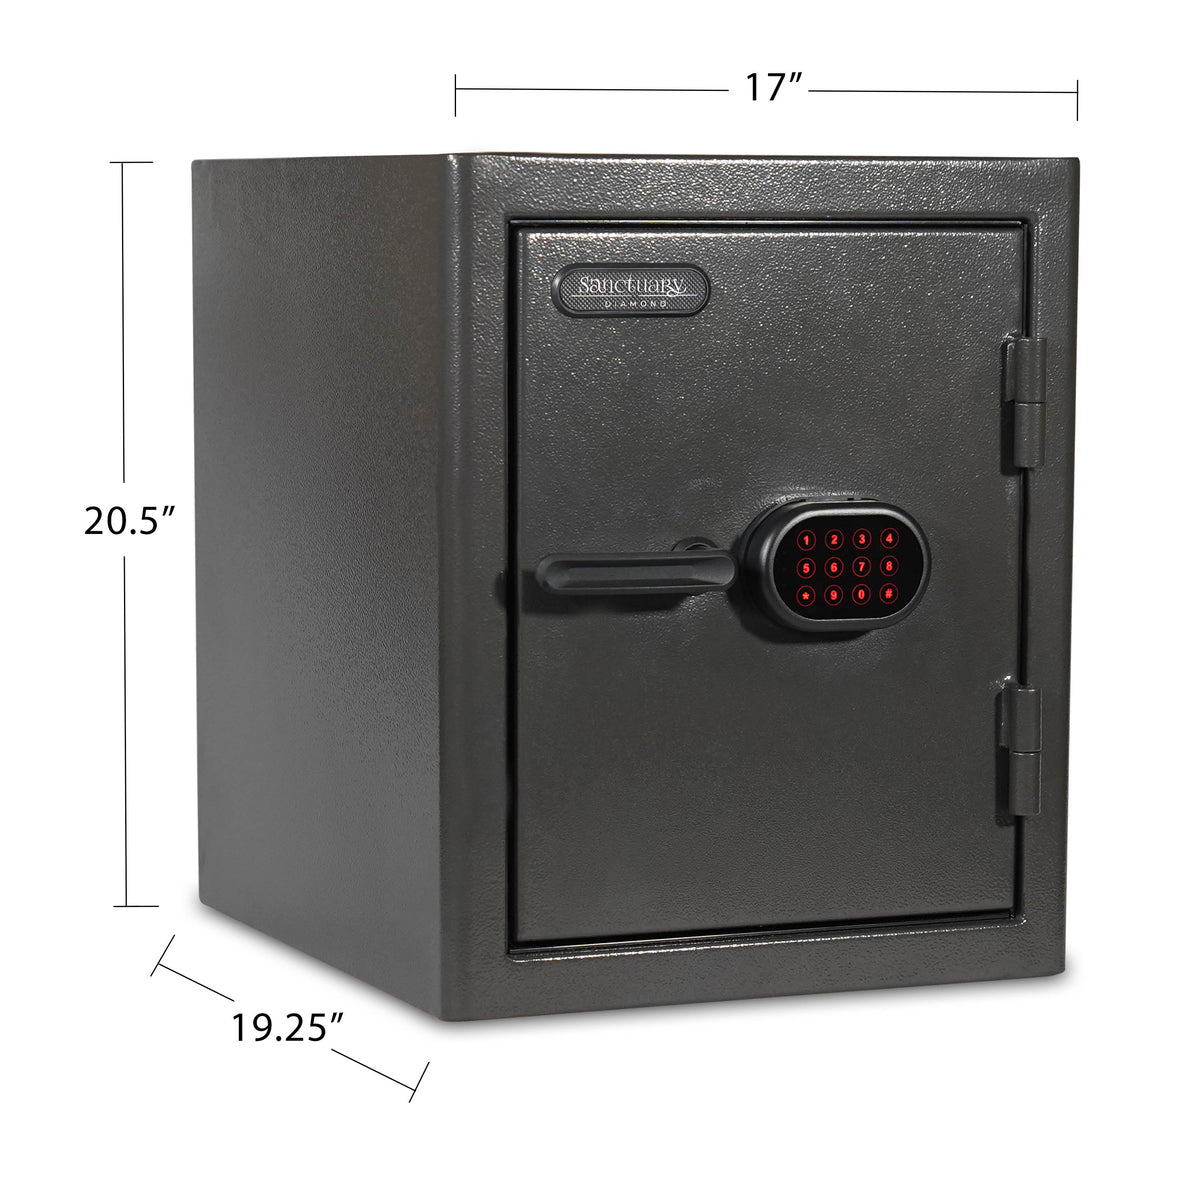 Sports Afield SA-DIA3 Sanctuary Diamond Series Electronic Home &amp; Office Safe Specifications